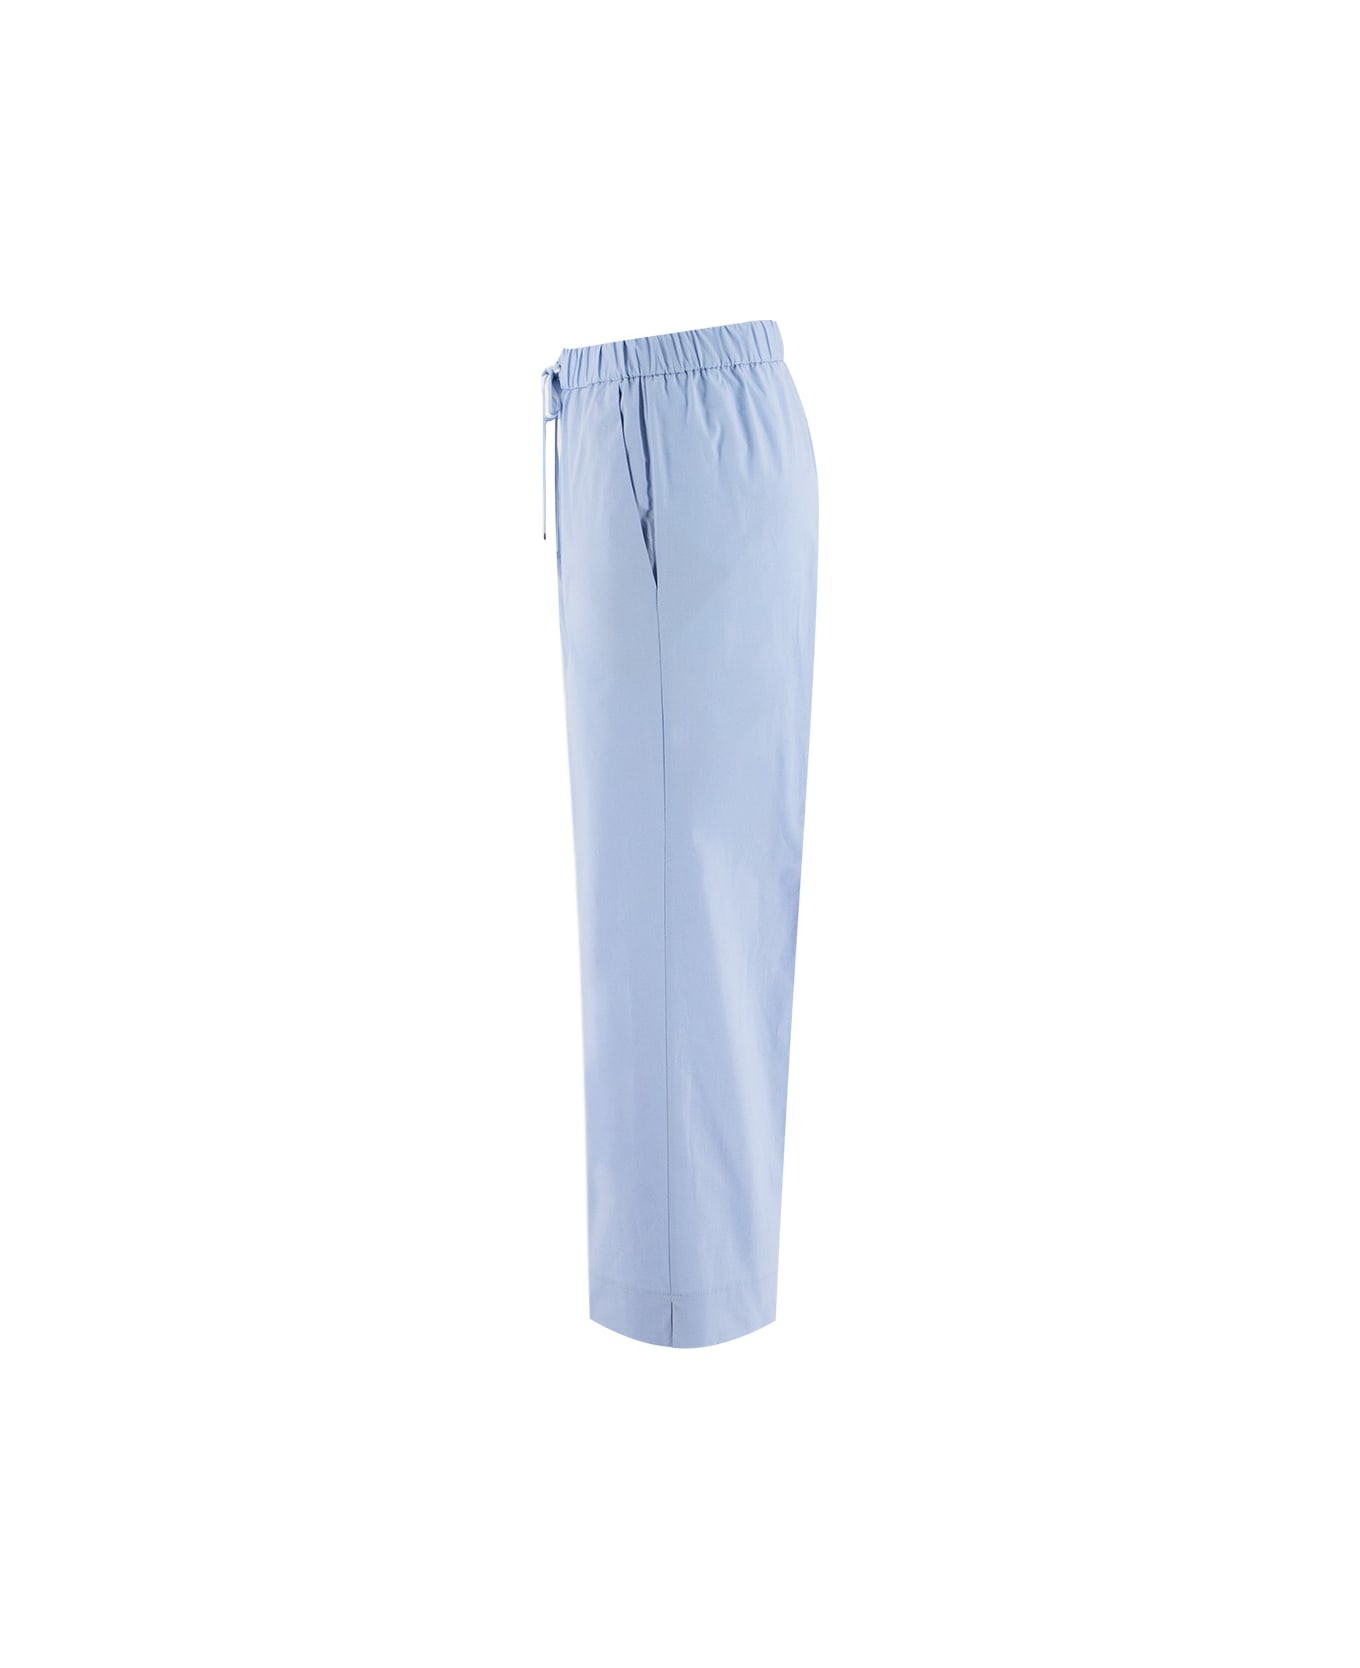 Le Tricot Perugia Trousers - SKY_SKY_WHITE ボトムス